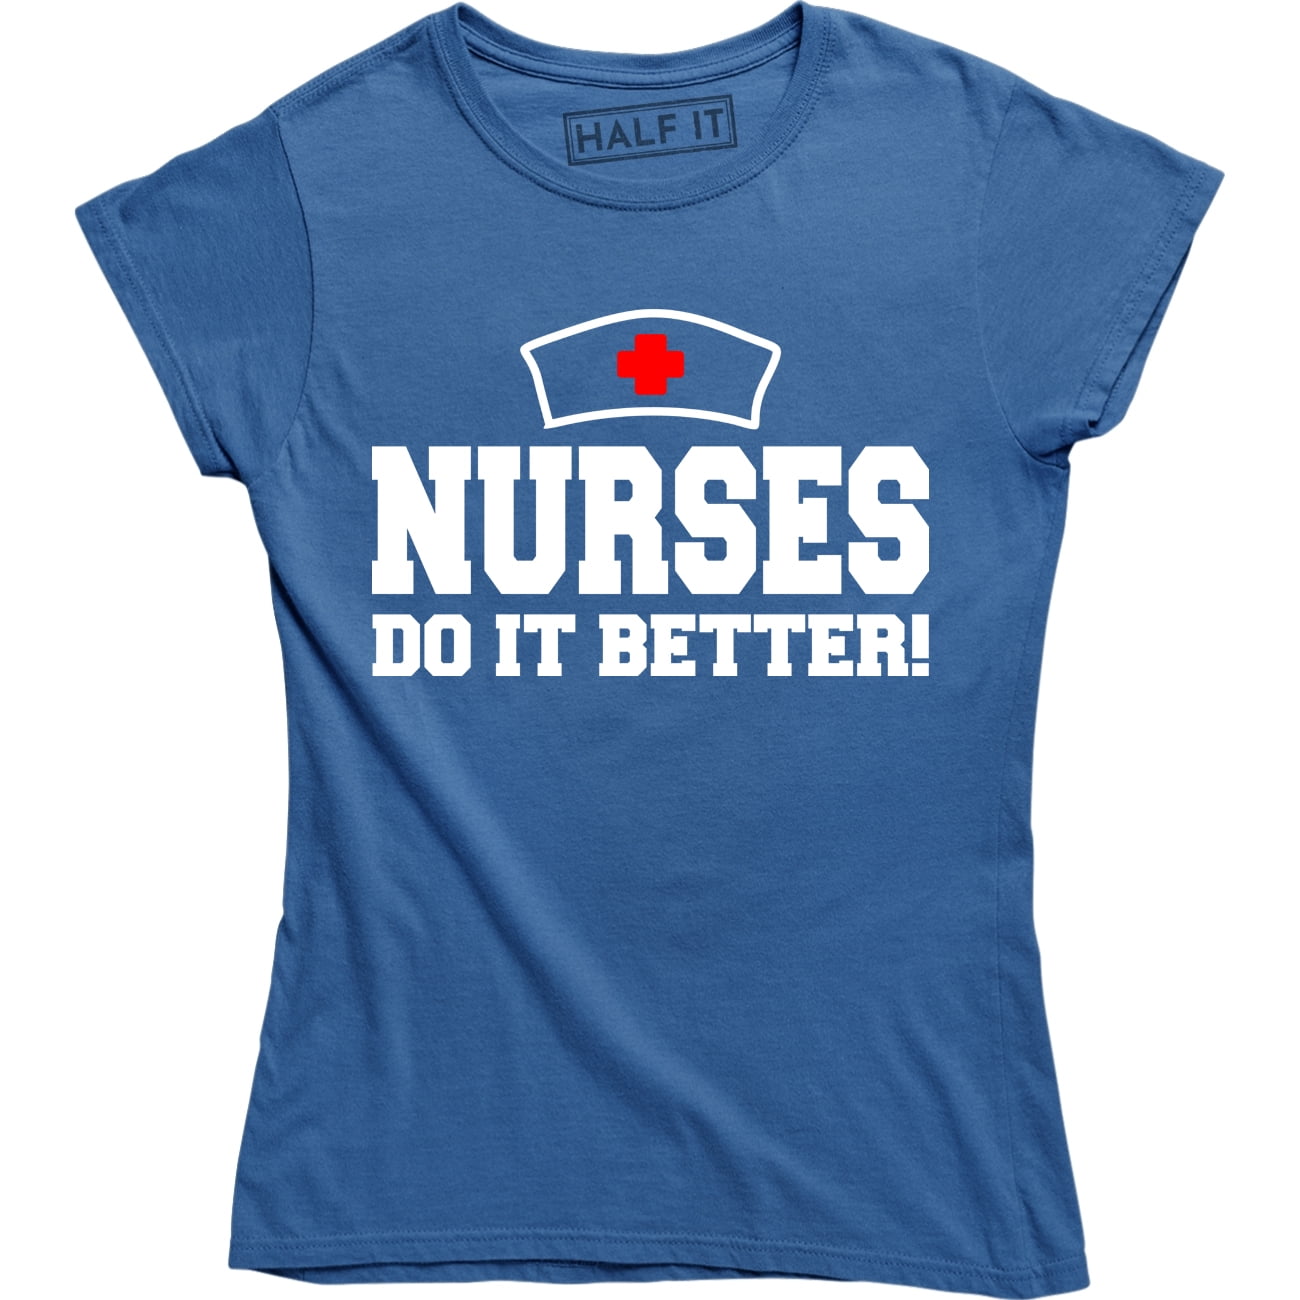 Show Your Pride With A 'Nurses Do It Better' Shirt